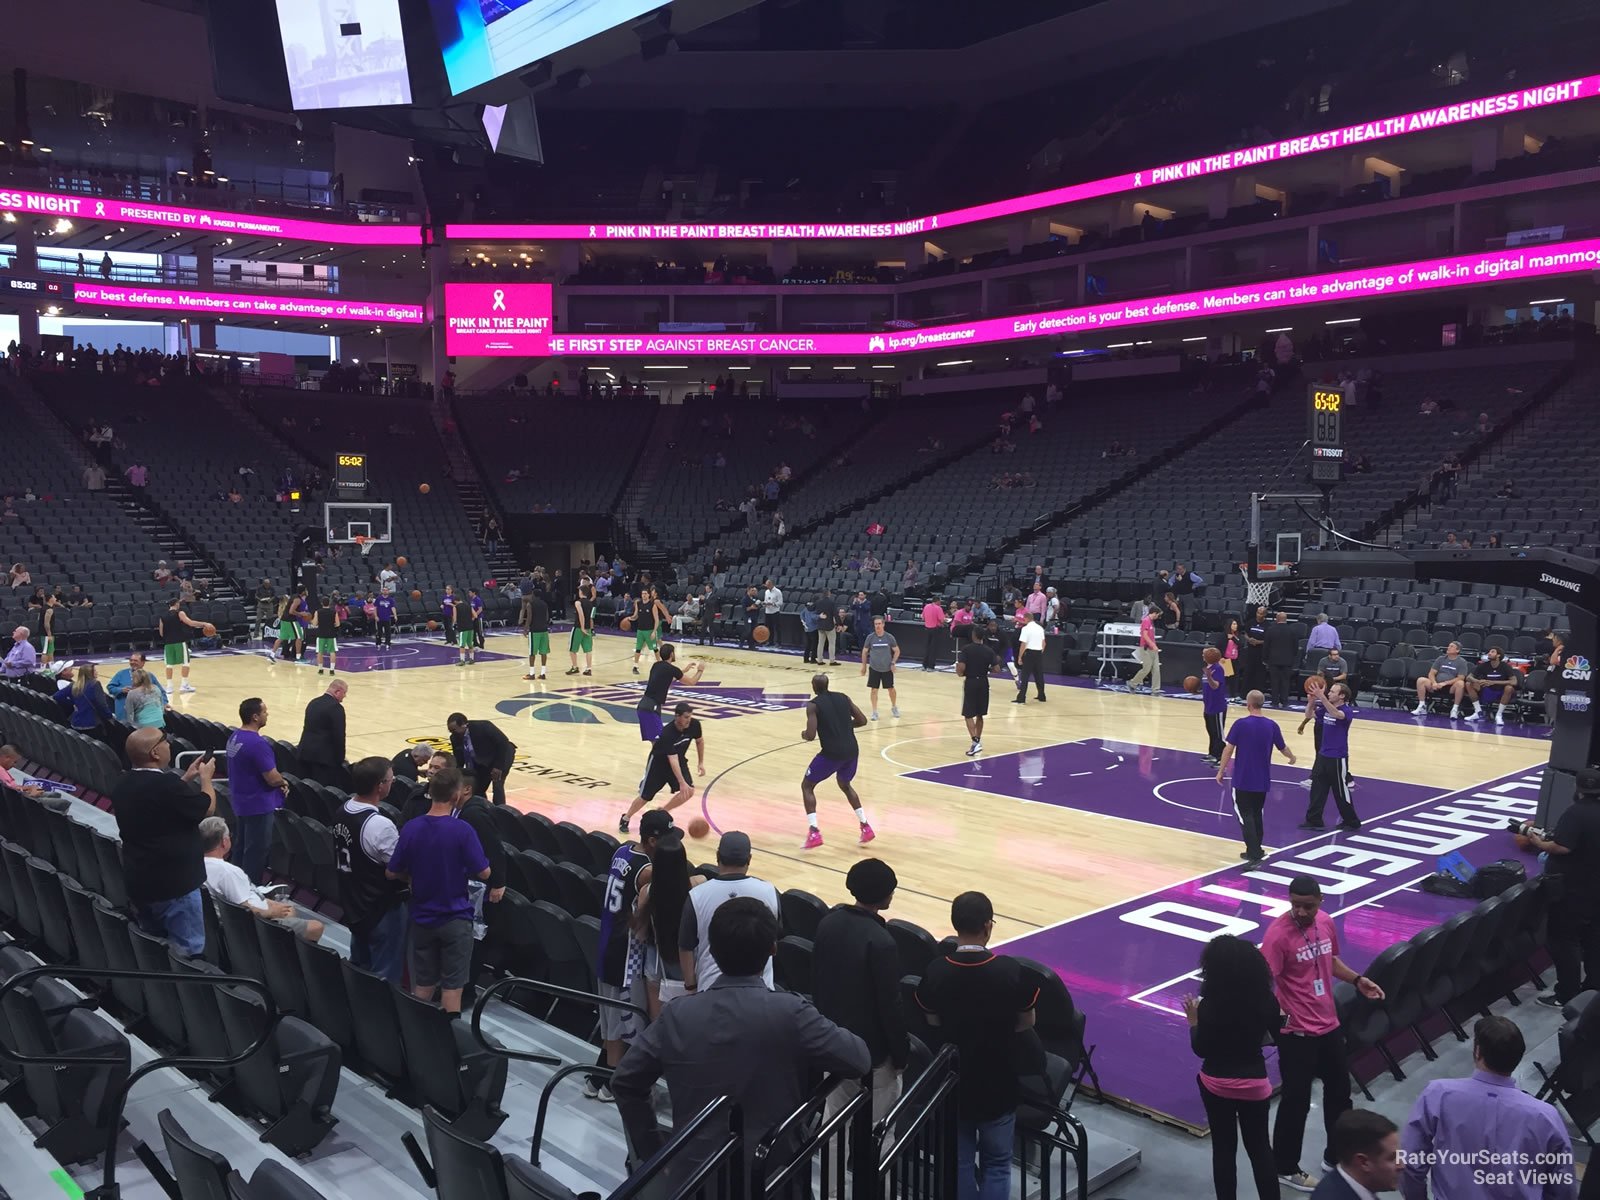 section 117, row dd seat view  for basketball - golden 1 center